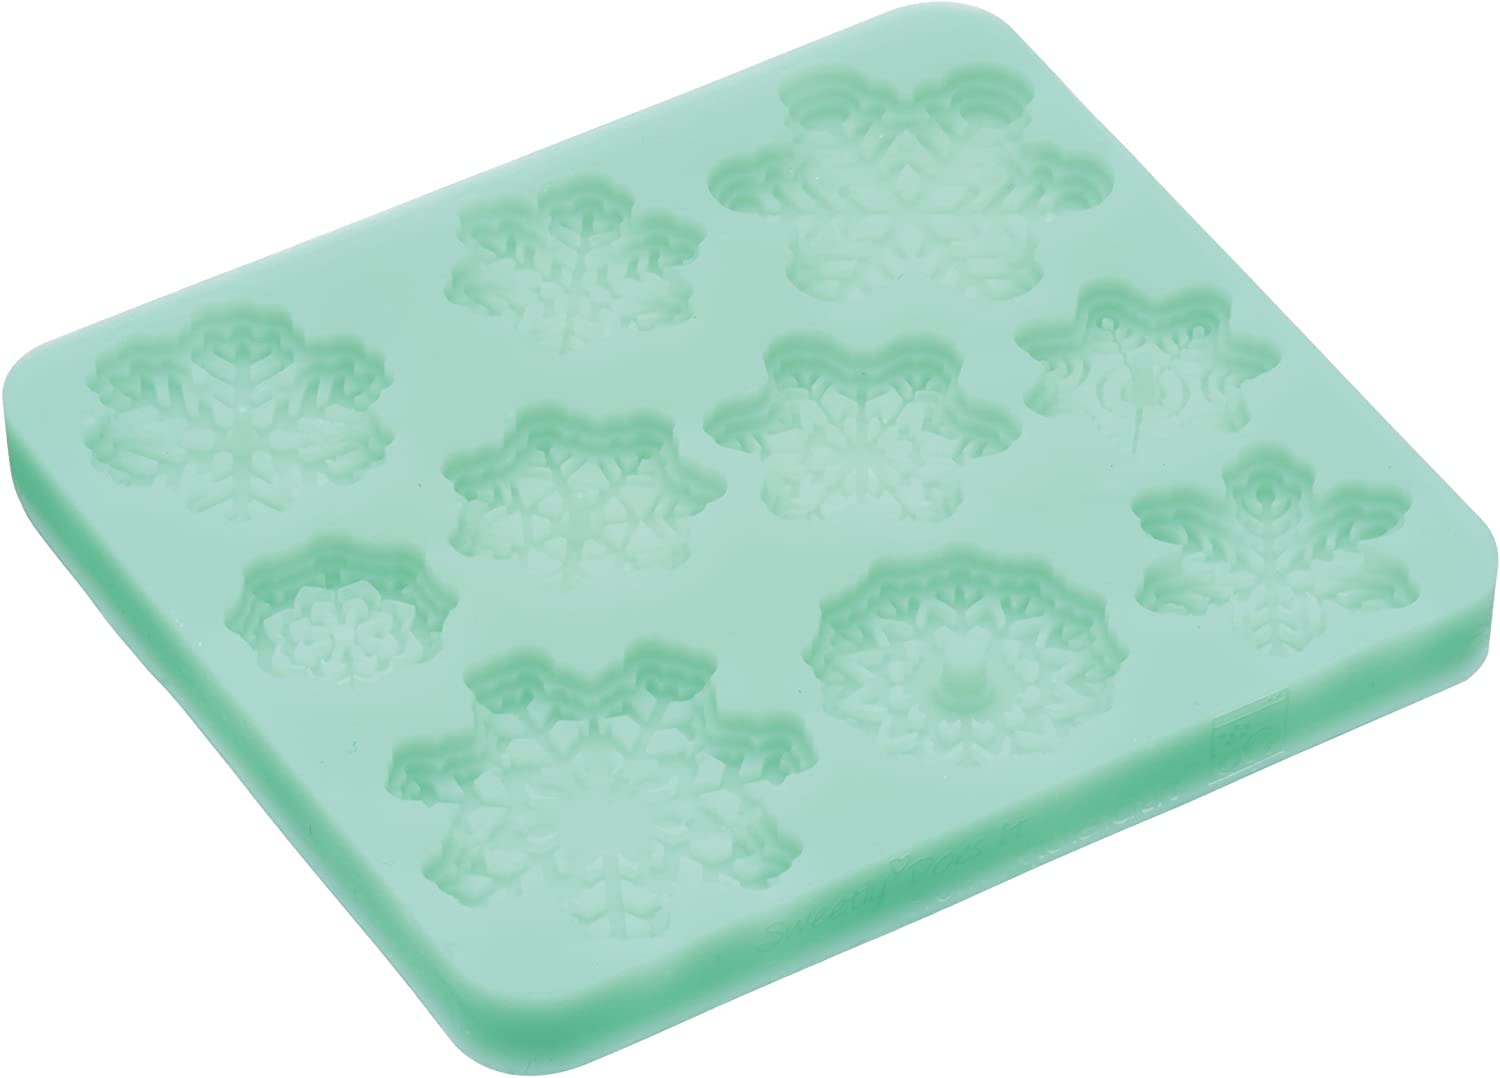 KitchenCraft Kitchen Craft Sweetly Does It Snowflakes Silicone Fondant Mould